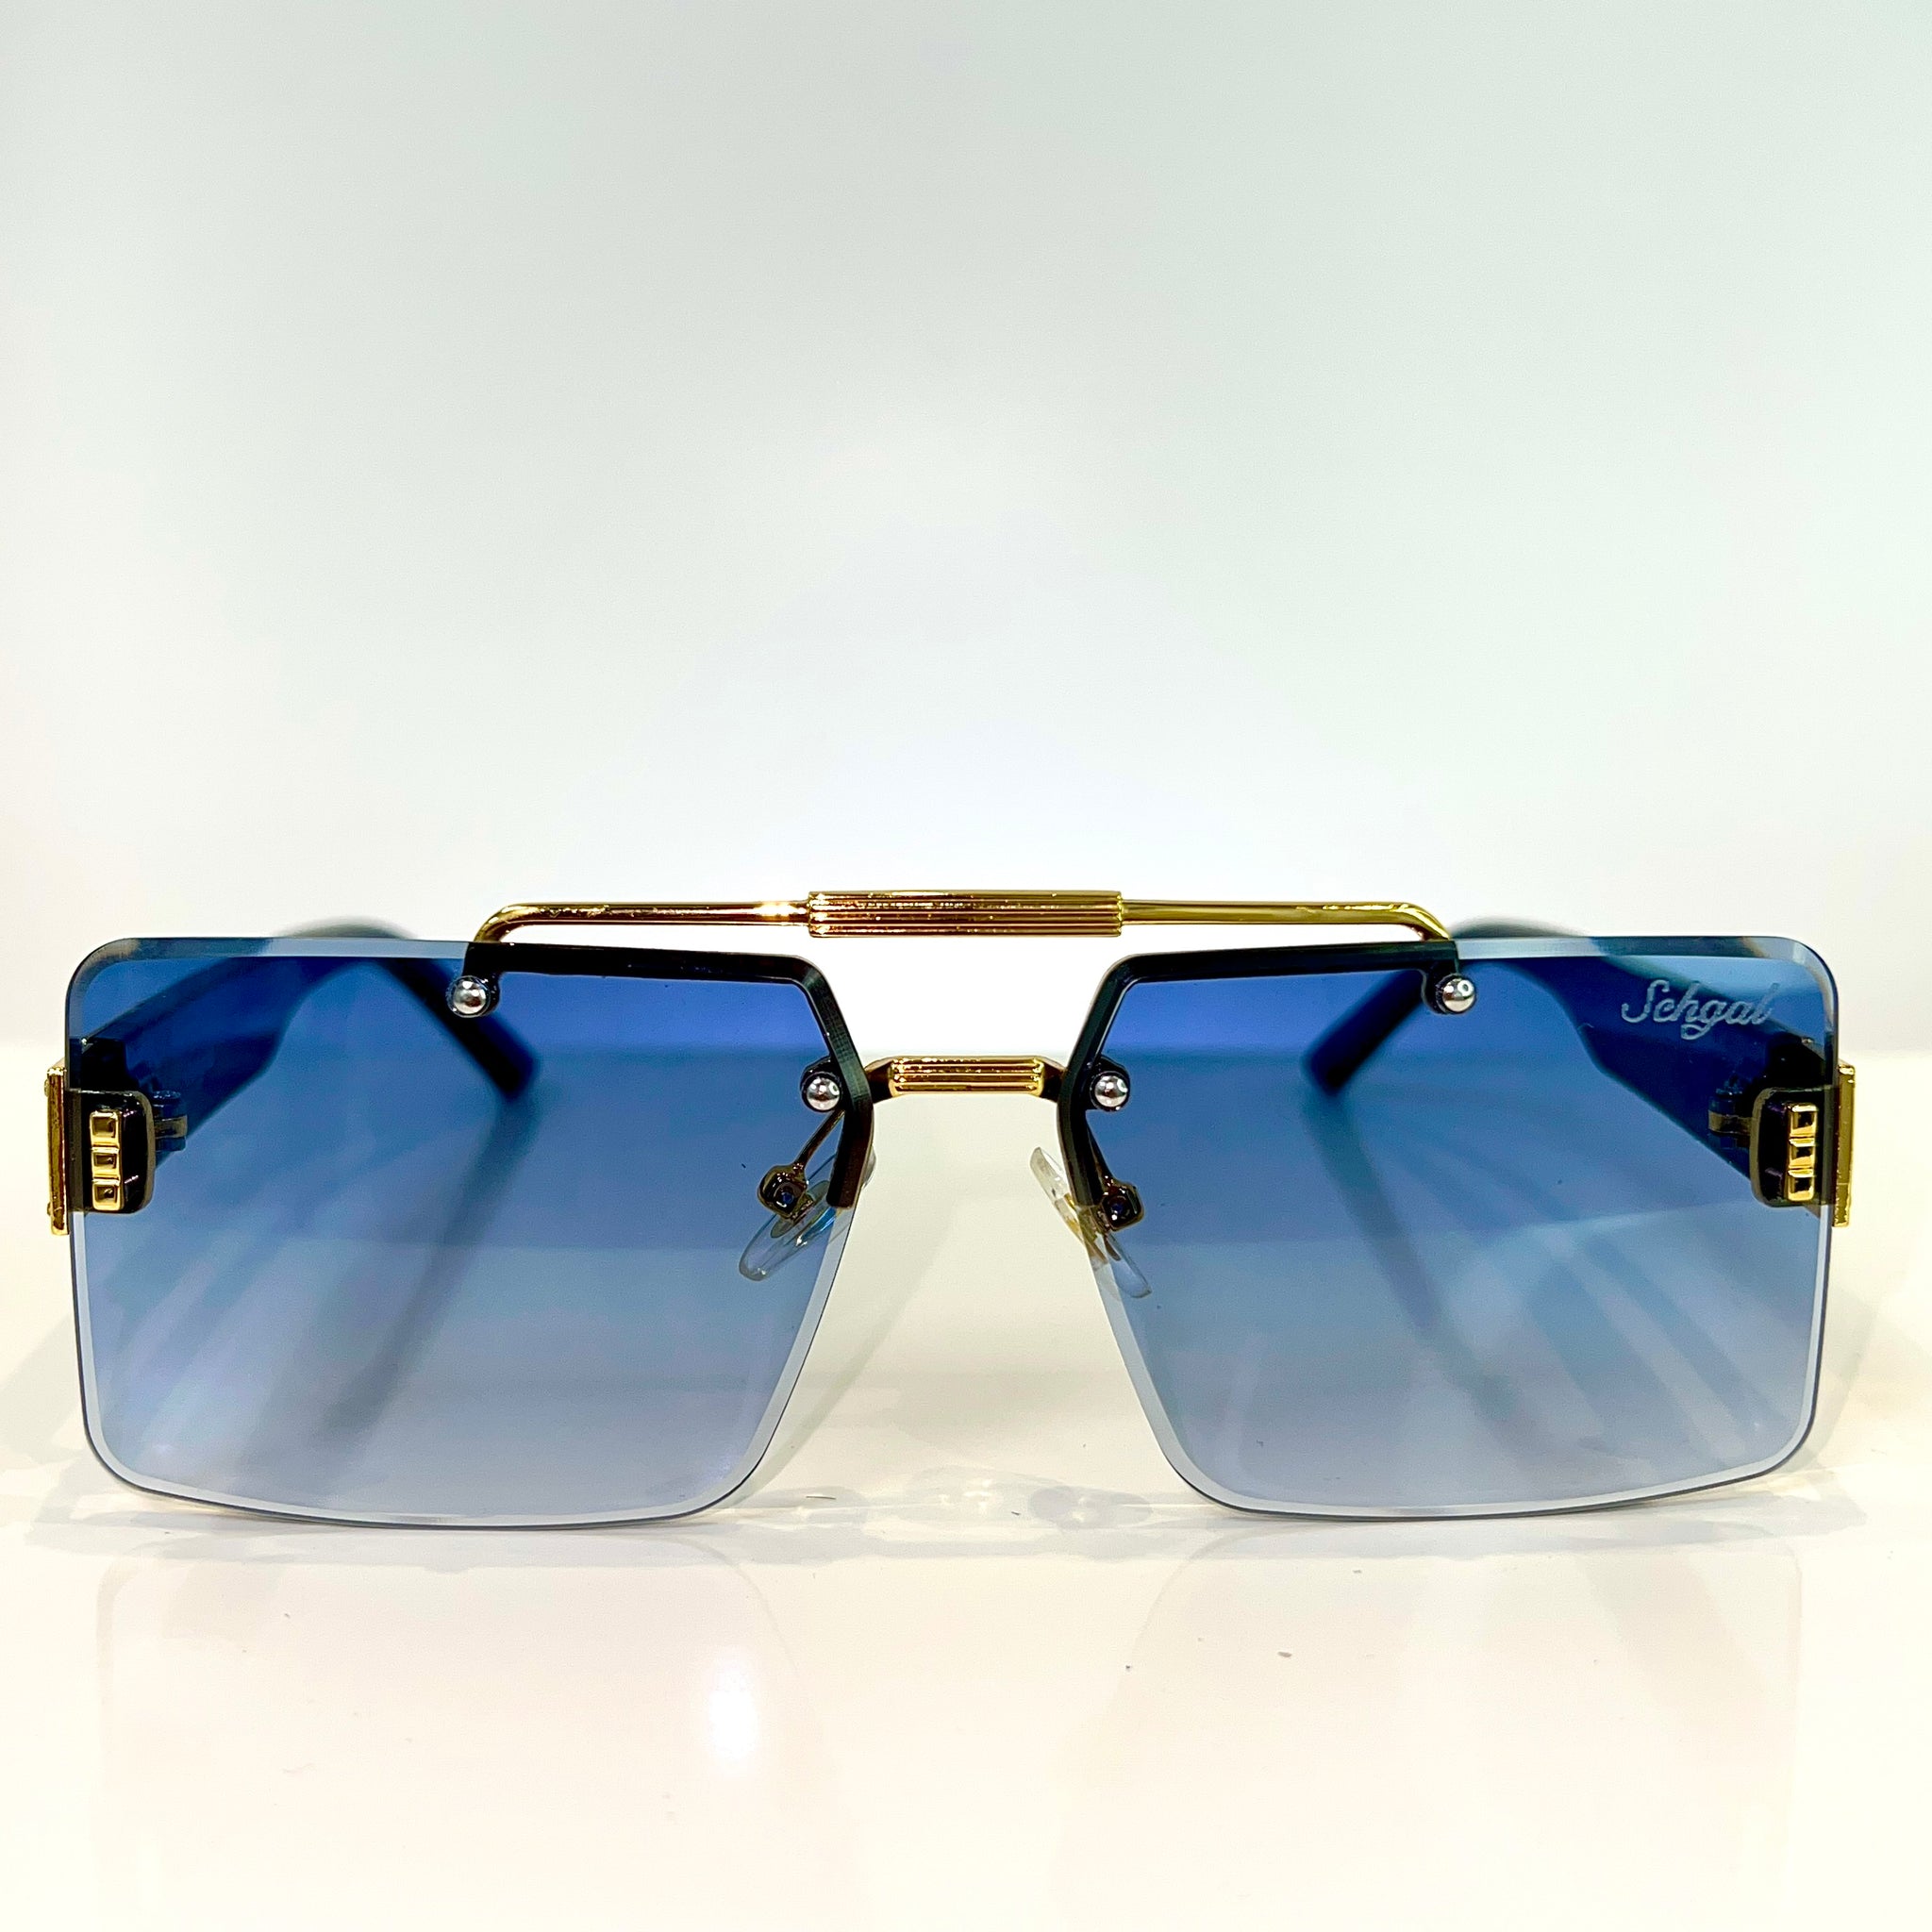 Project X Glasses - 14 carat gold plated - Blue Shade